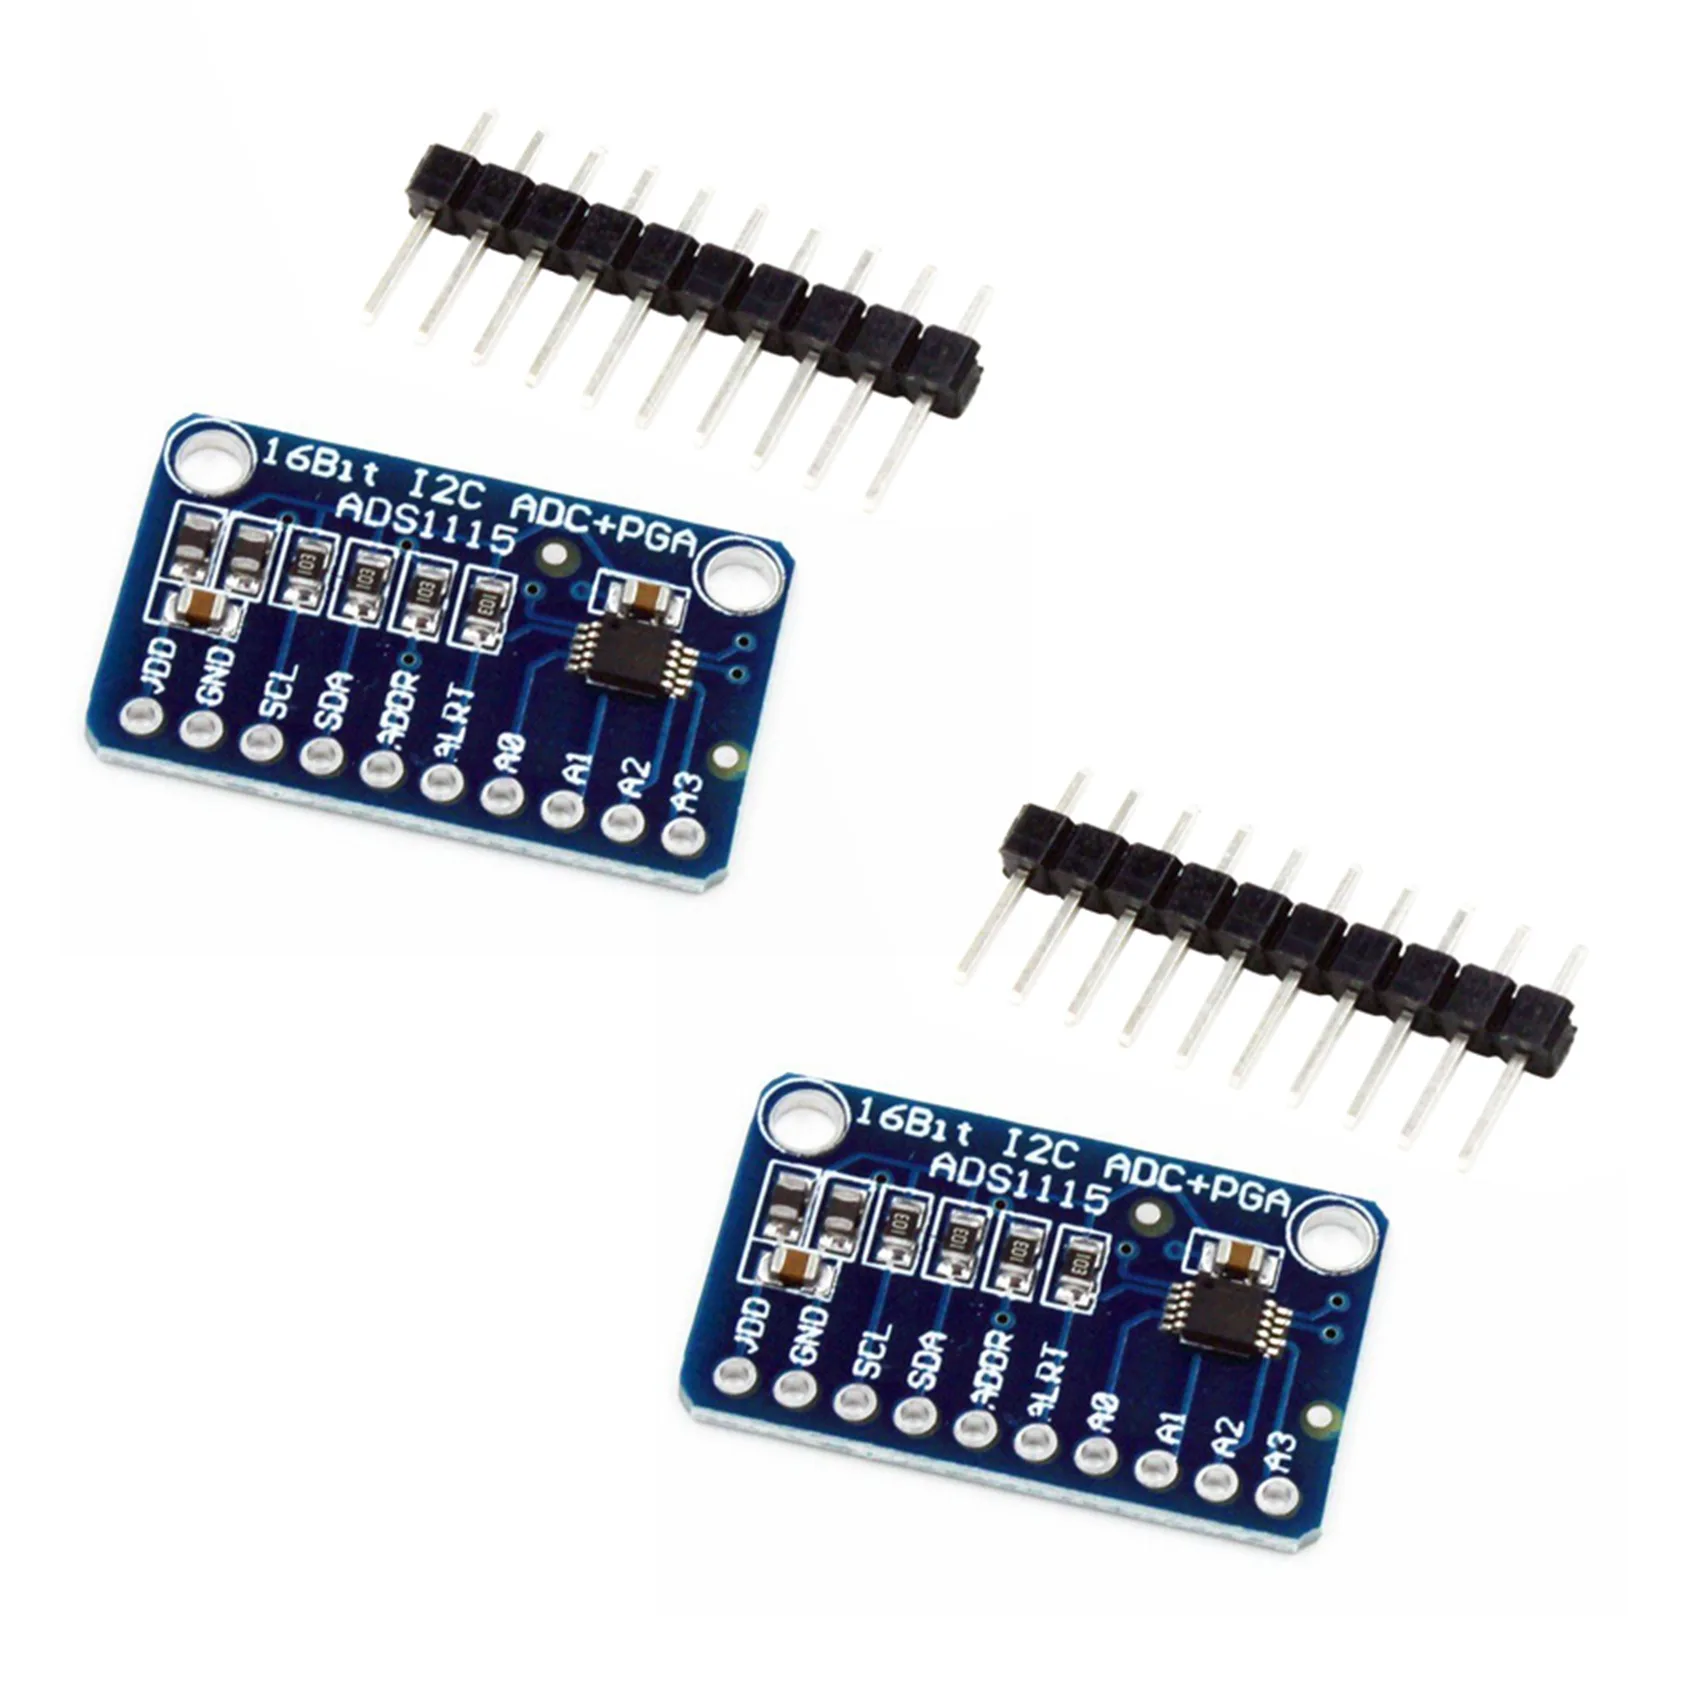 

2X ADS1115 4 Channel 16 Bit I2C ADC Module with Pro Gain Amplifier for Arduino Rpi